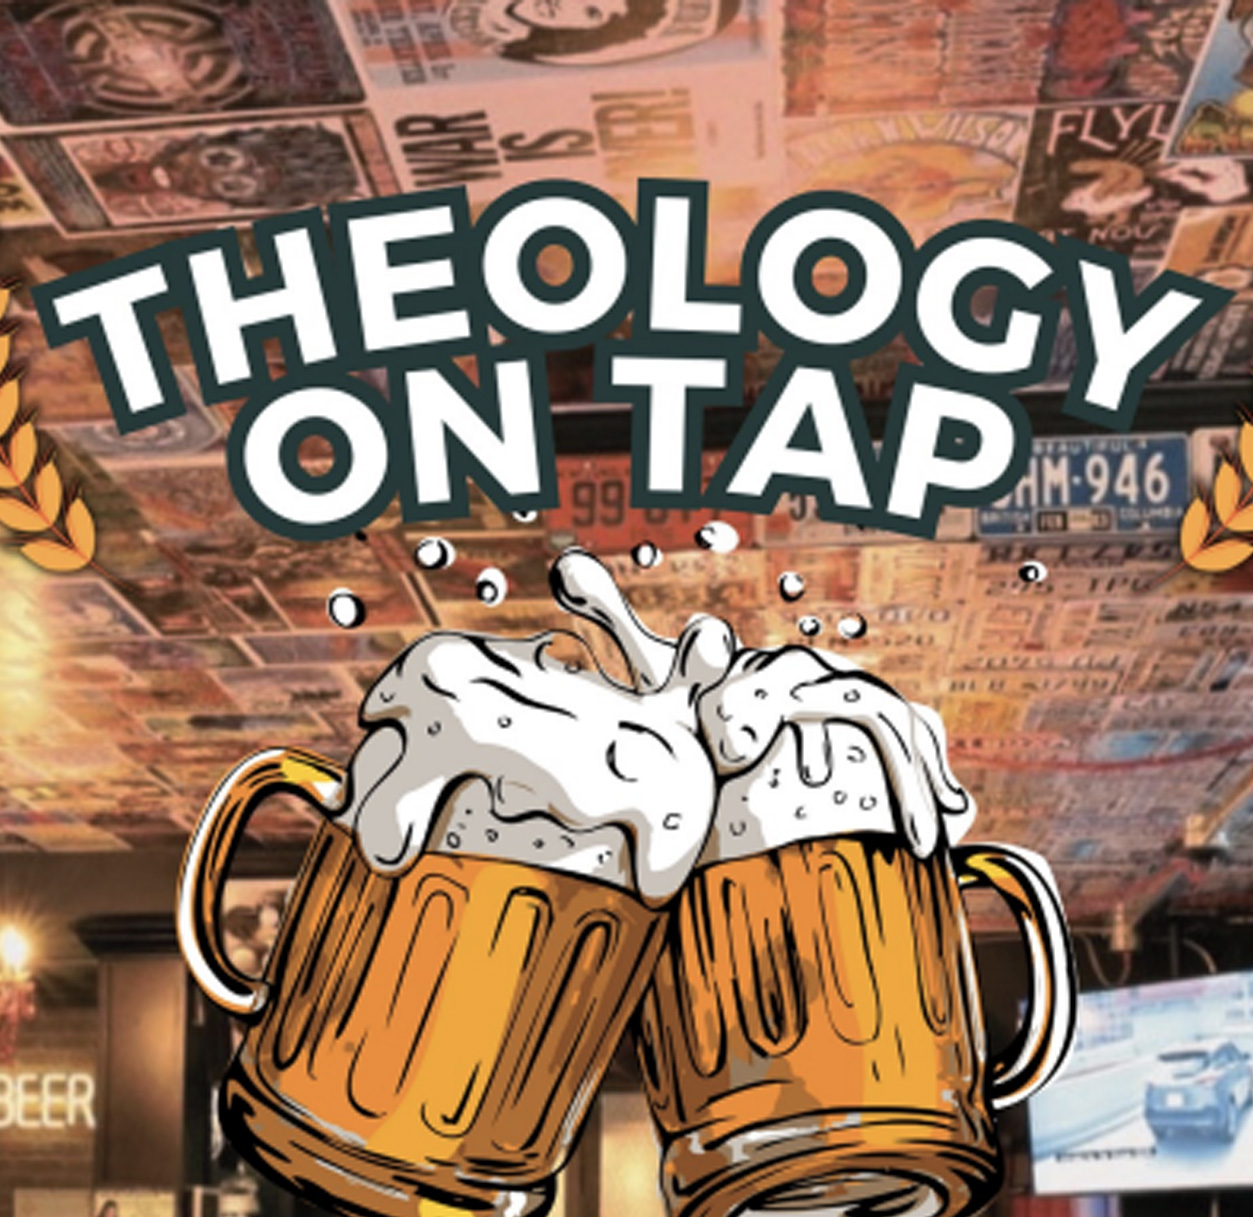 Theology on Tap rollup image